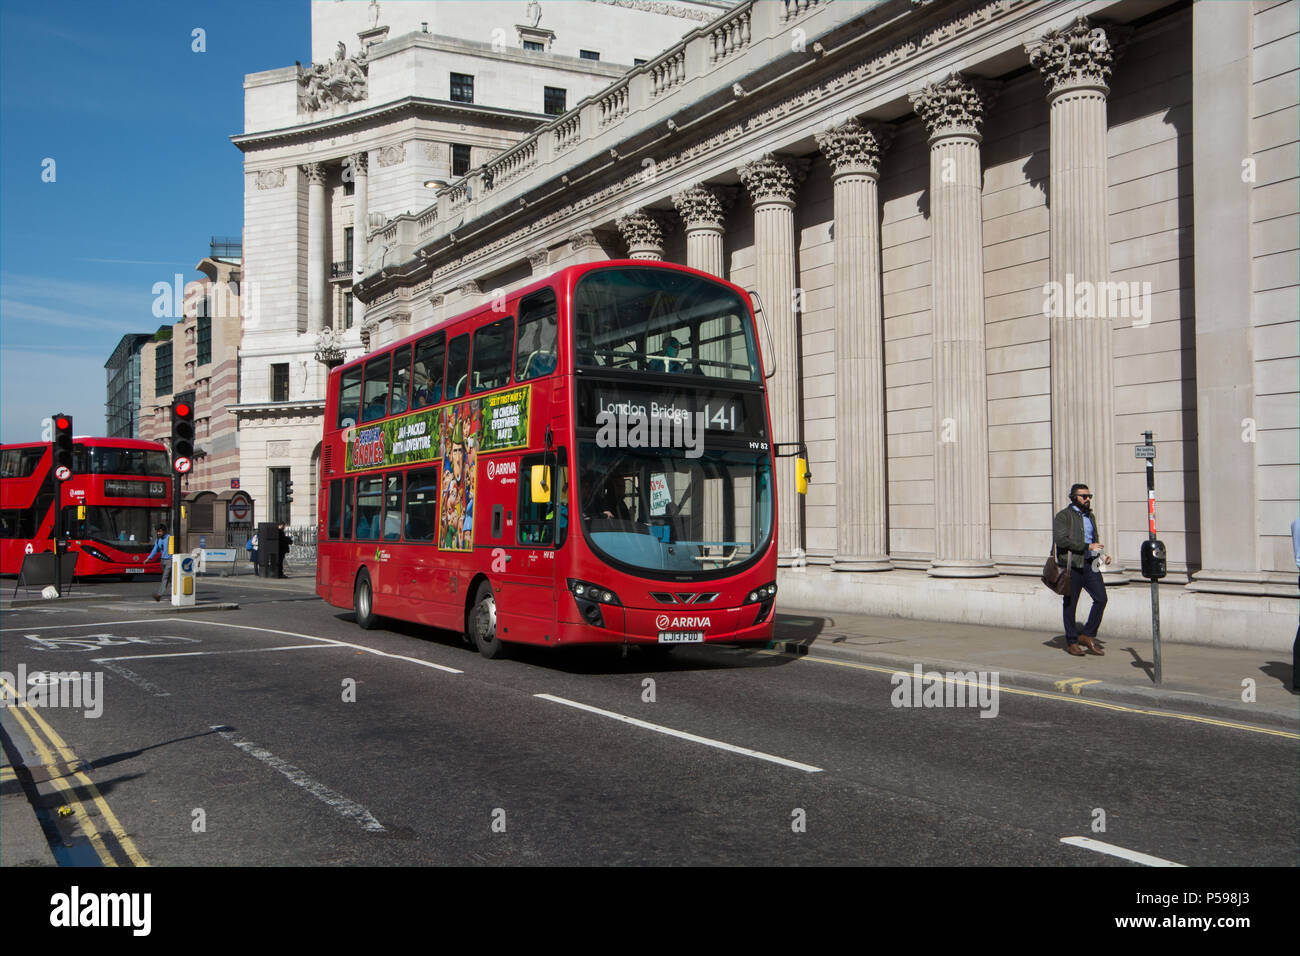 A hybrid bus operated by Arriva London travels along Threadneedle street past the Bank of England Stock Photo